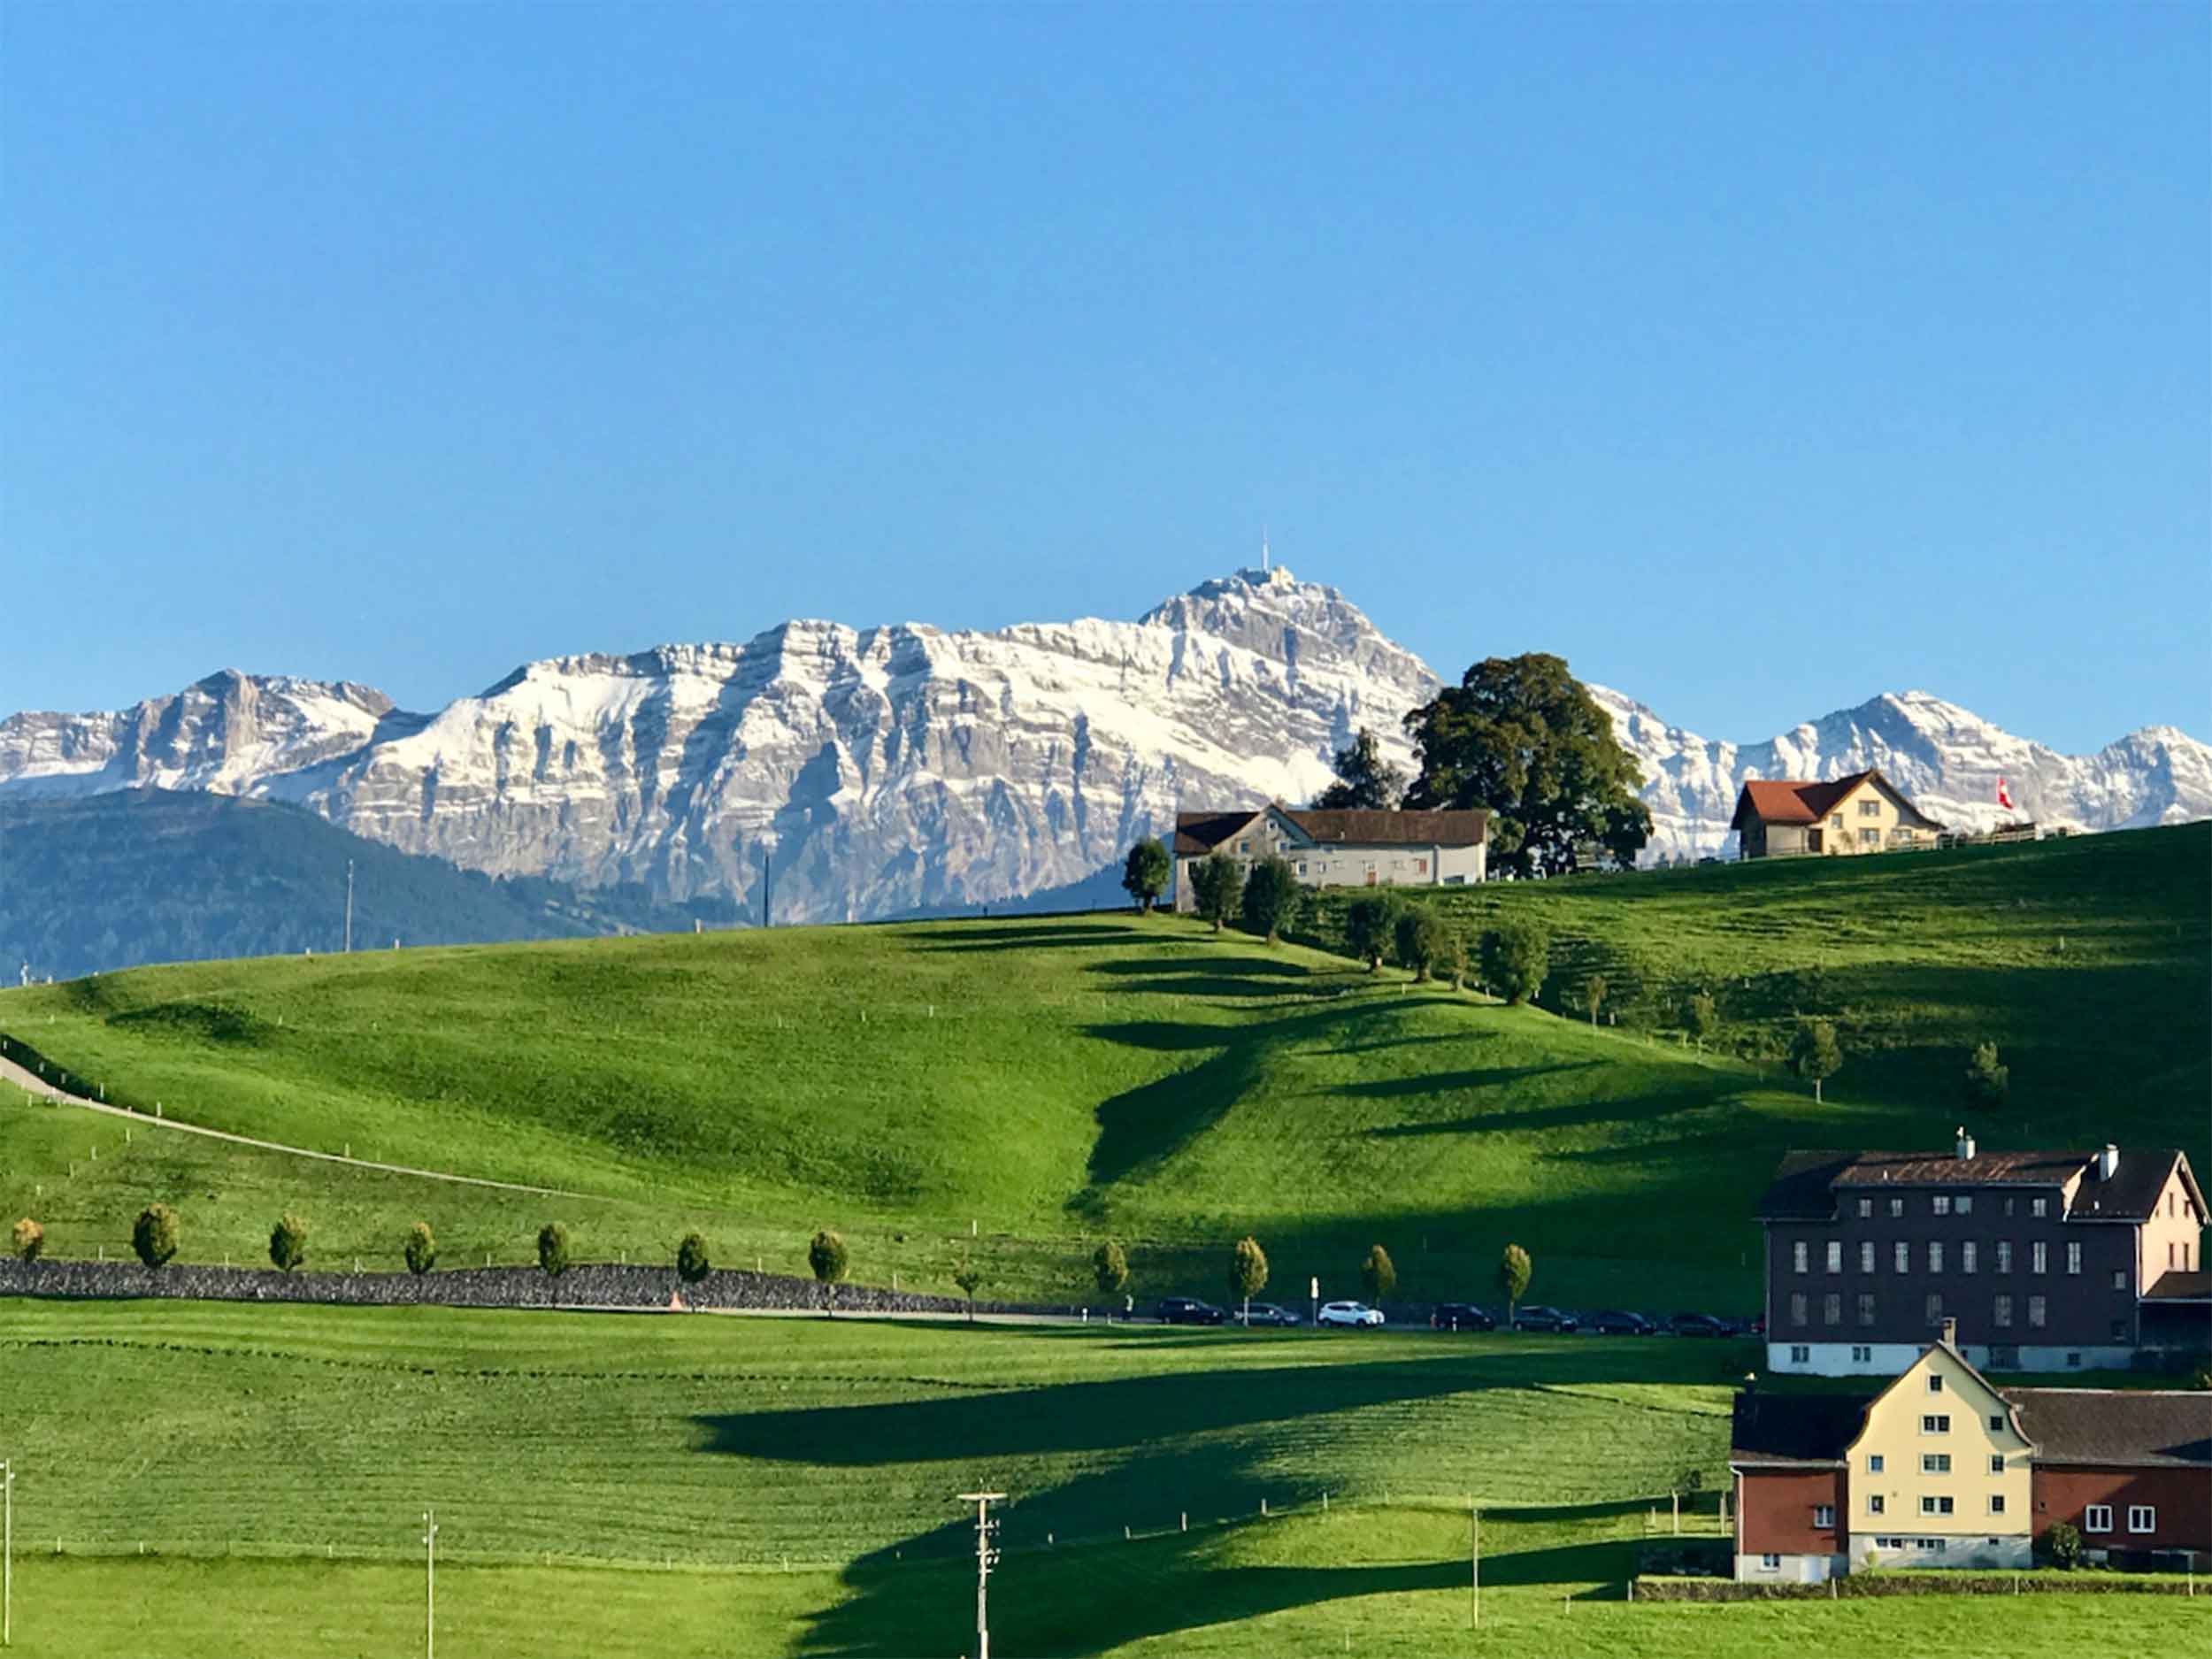 Appenzellerland First Hand Tour - Personal Guided Private Tours in Switzerland by Erwin Tours of Switzerland - Photo @ Erwin Fässler Photography